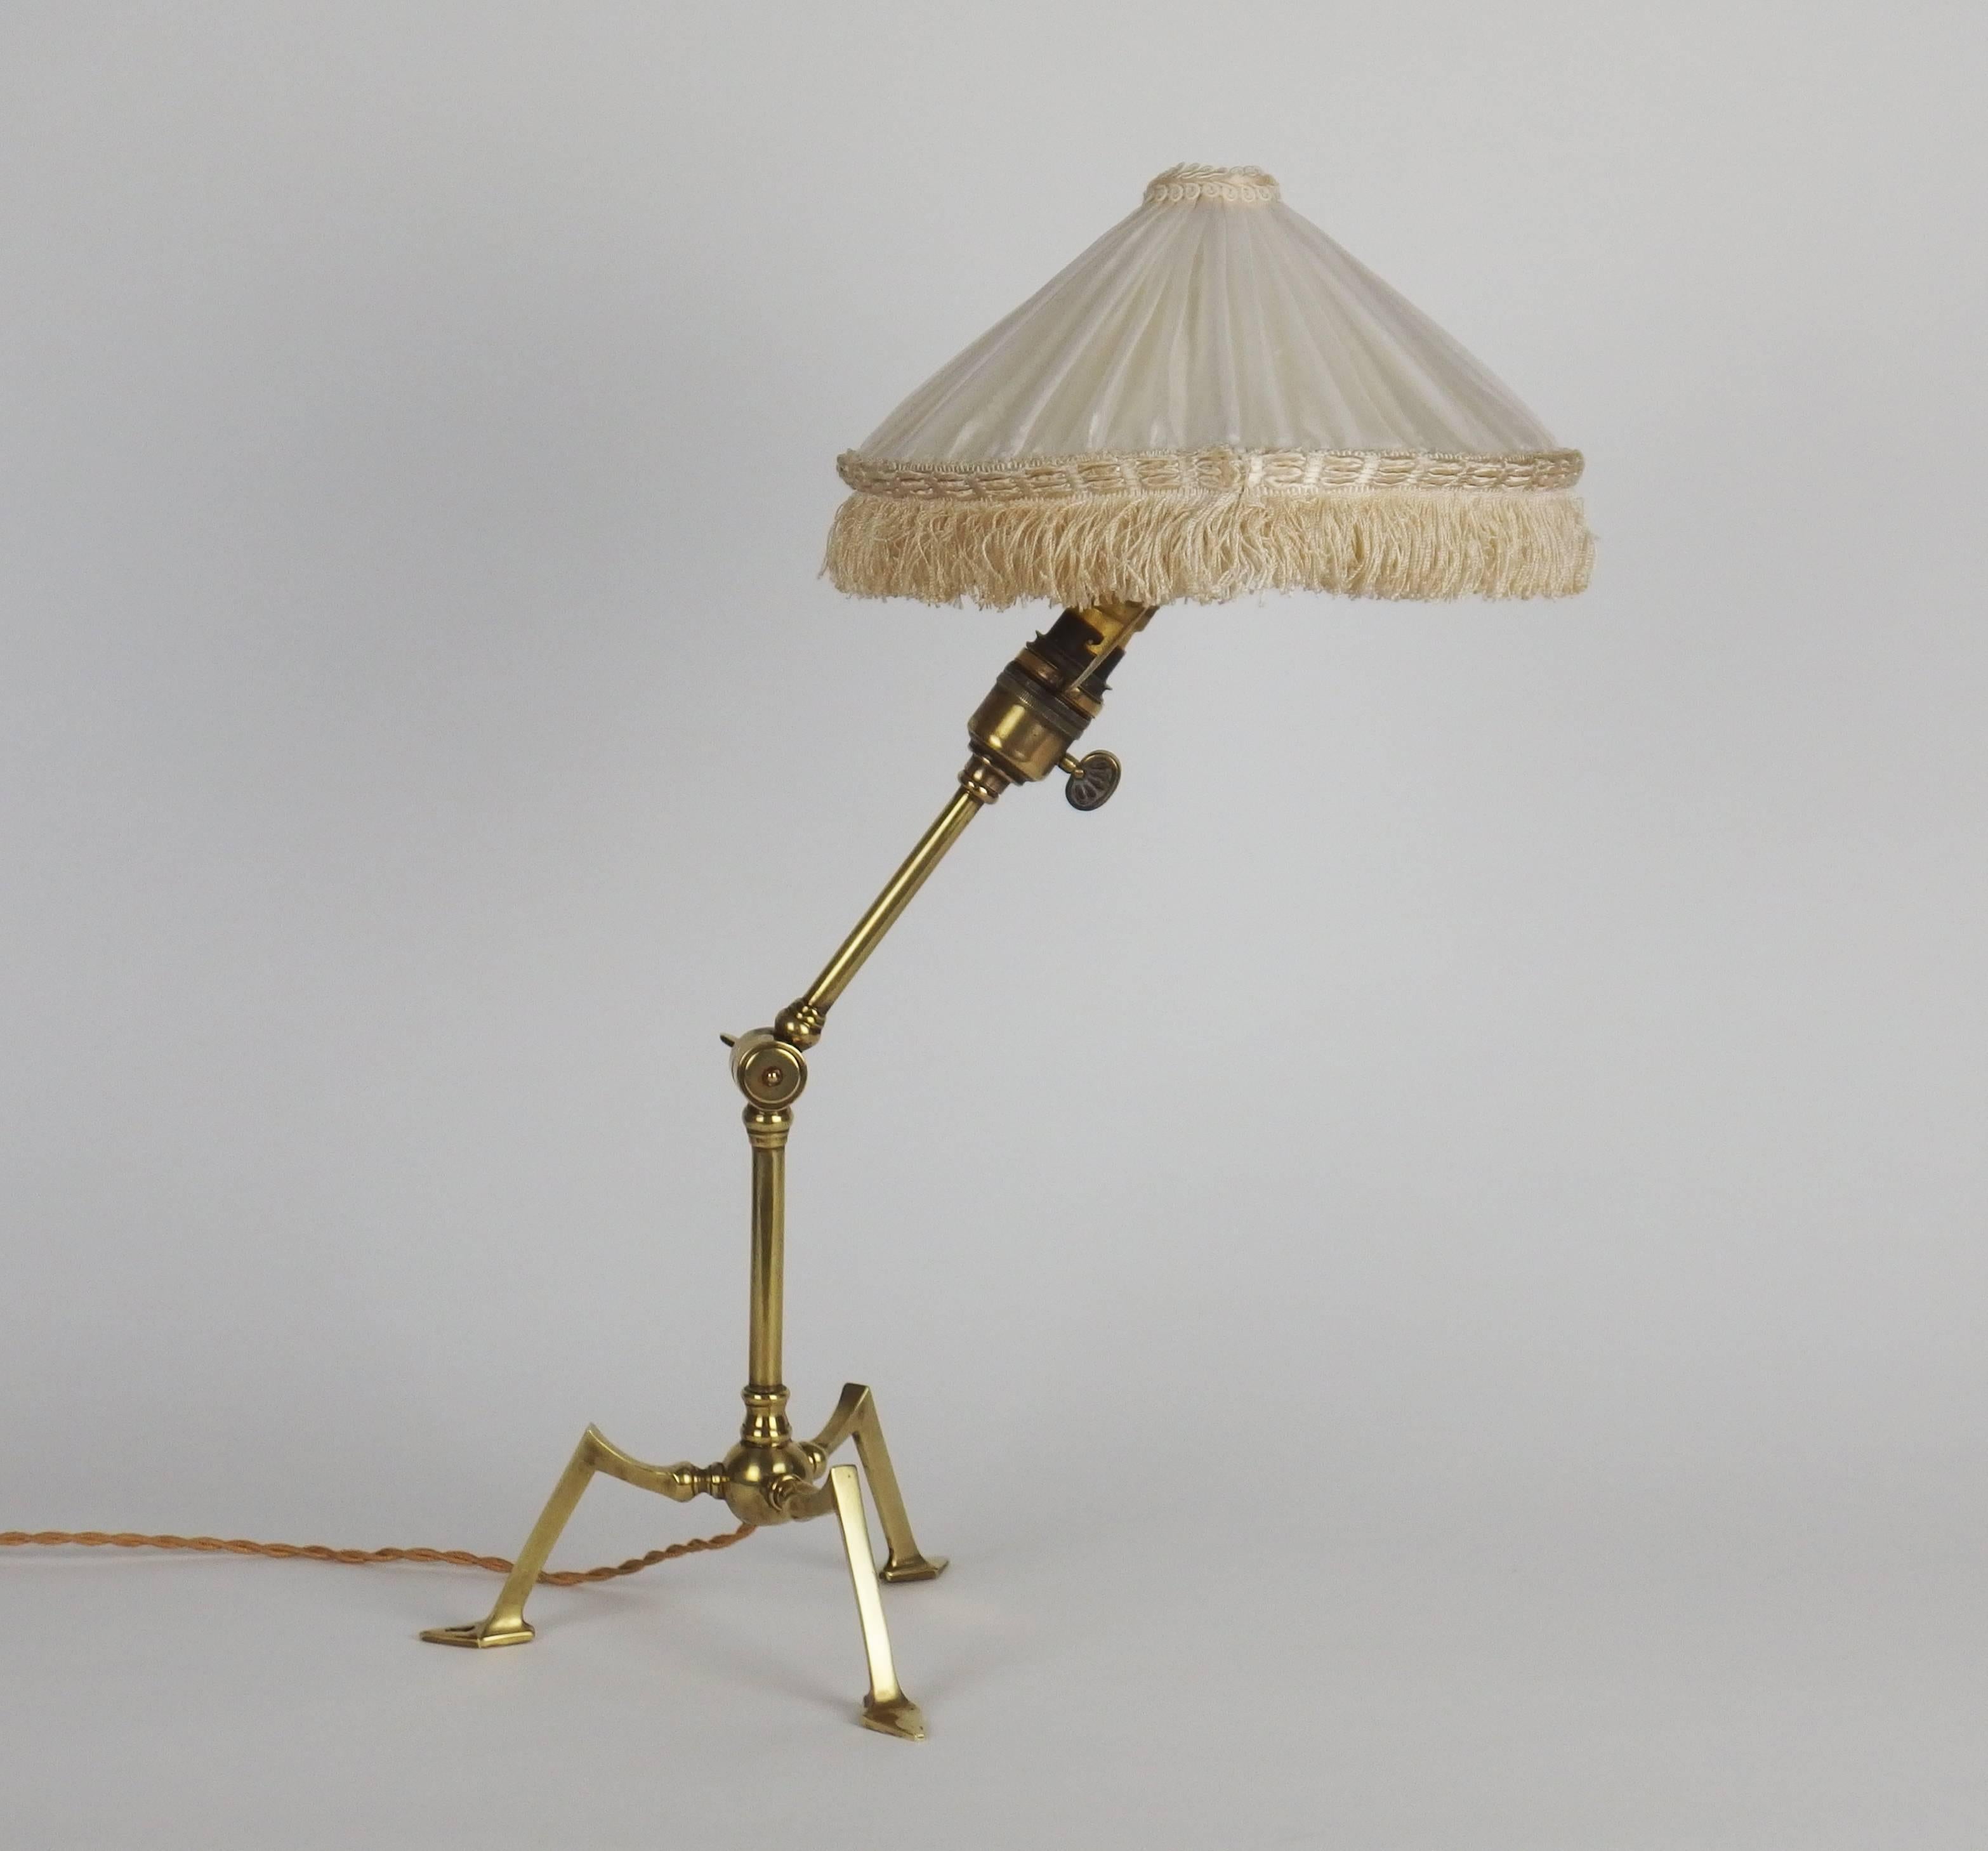 A three feet adjustable brass table lamp with a swivelling shade support, thanks to this system and the drilled hole in one foot, this lamp can be used as a sconce.
Measure: Height without the shade: 13.3in
This table lamp is attributed to W.A.S